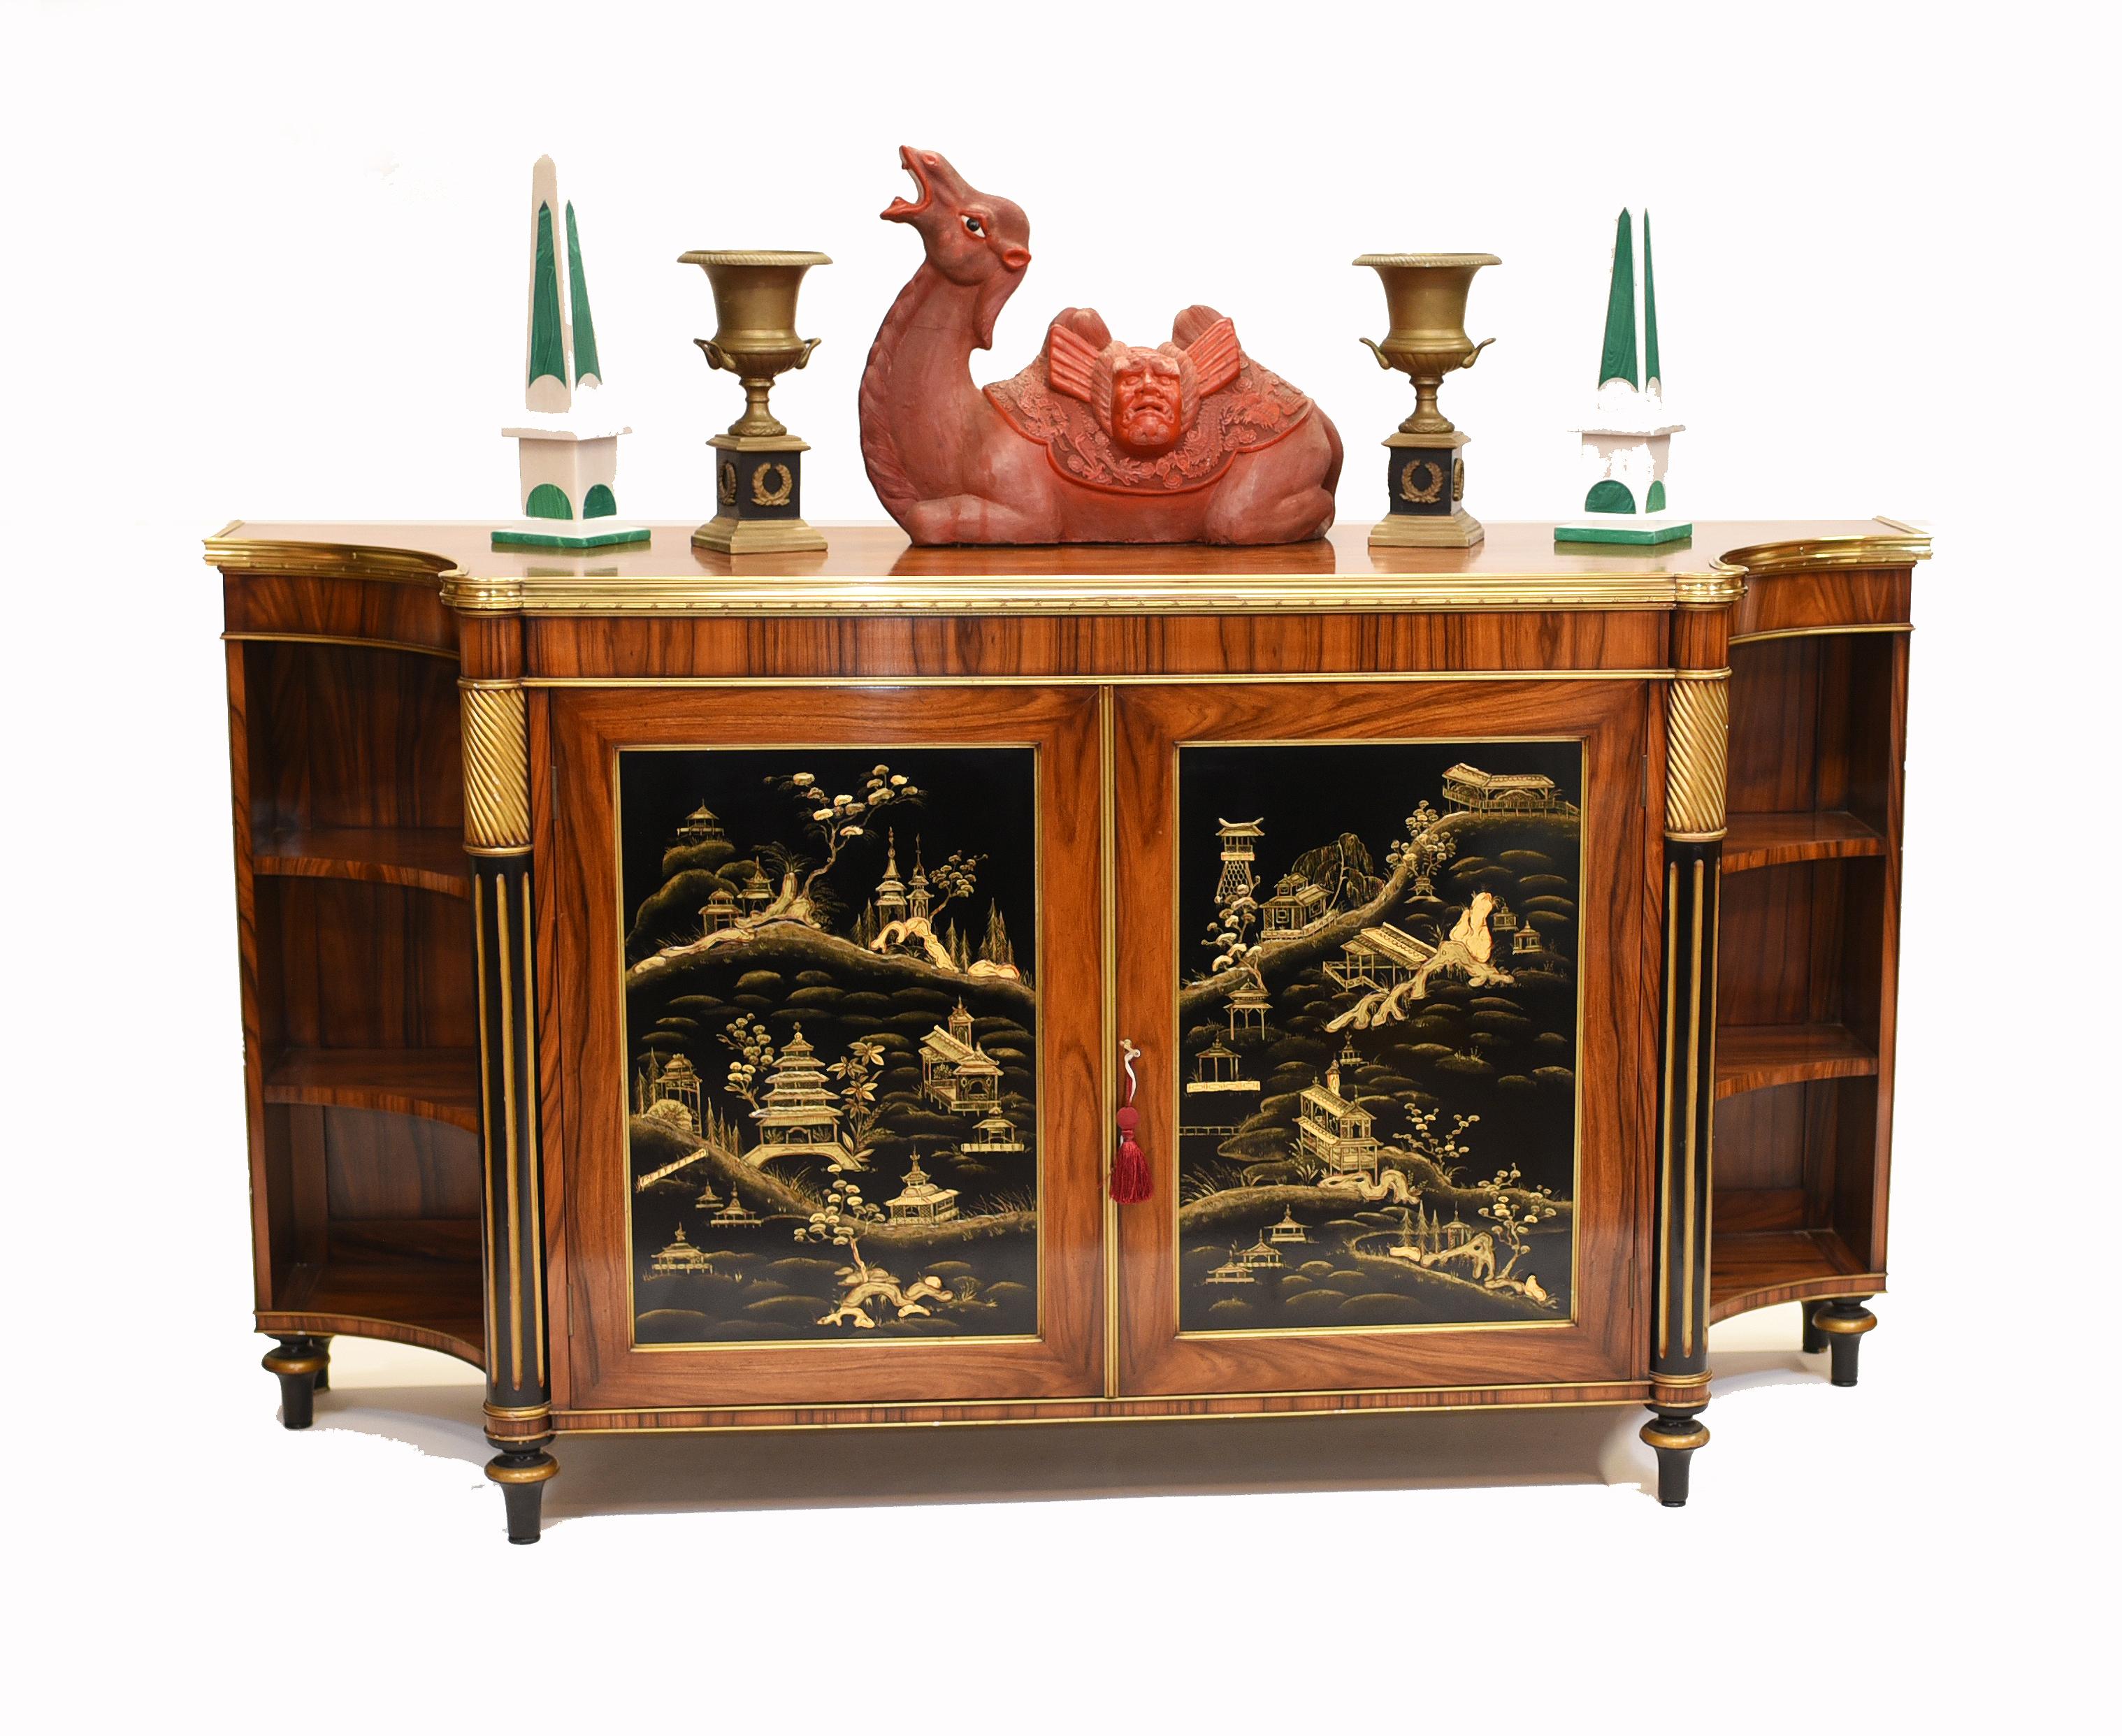 - You are viewing a gorgeous French antique Regency chiffonier - or sideboard
- The piece has been crafted from rosewood with original ormolu fixtures
- Of course the main feature is perhaps the door panels decorated with ornate Chinoiserie
-